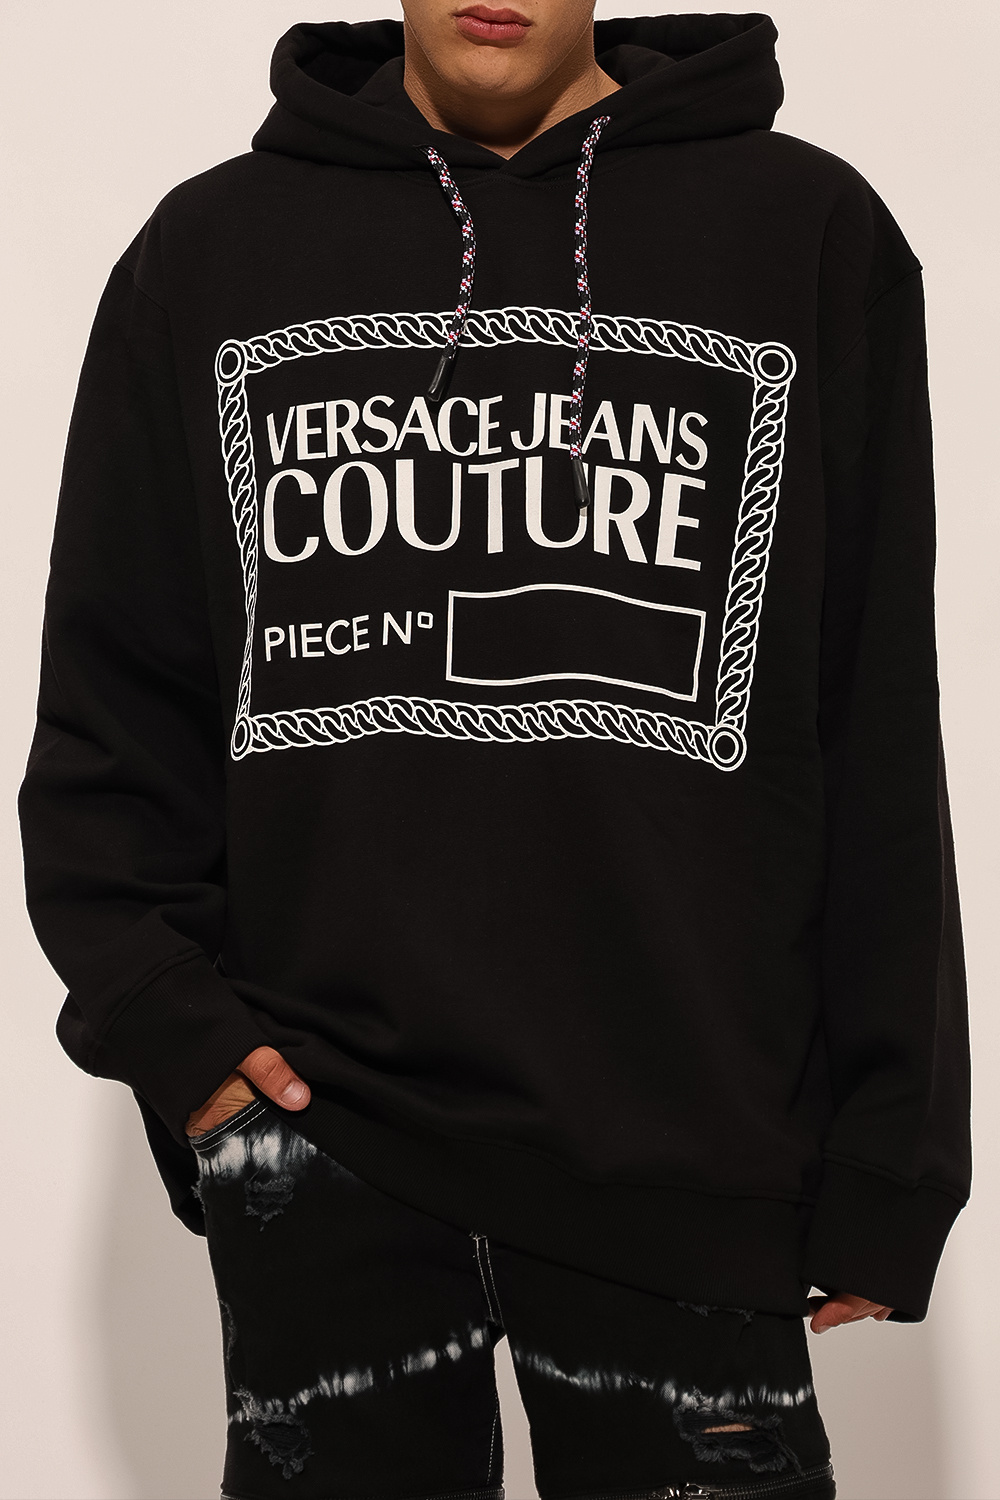 Versace Jeans Couture HONOR THE GIFT Bomber Jackets for Men